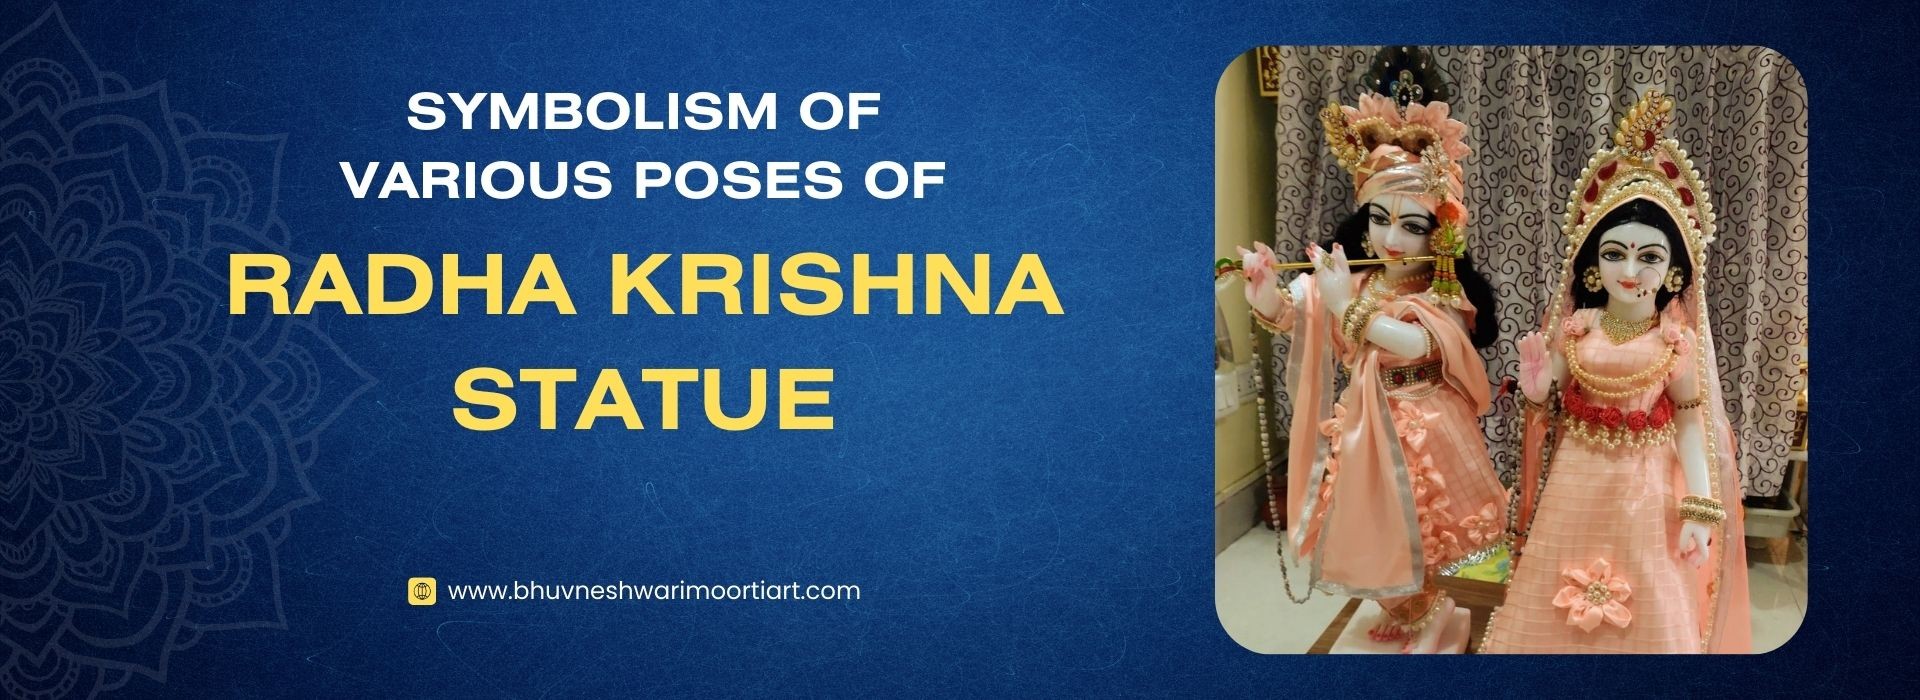 The Symbolism of Various Poses of the Radha Krishna Statue